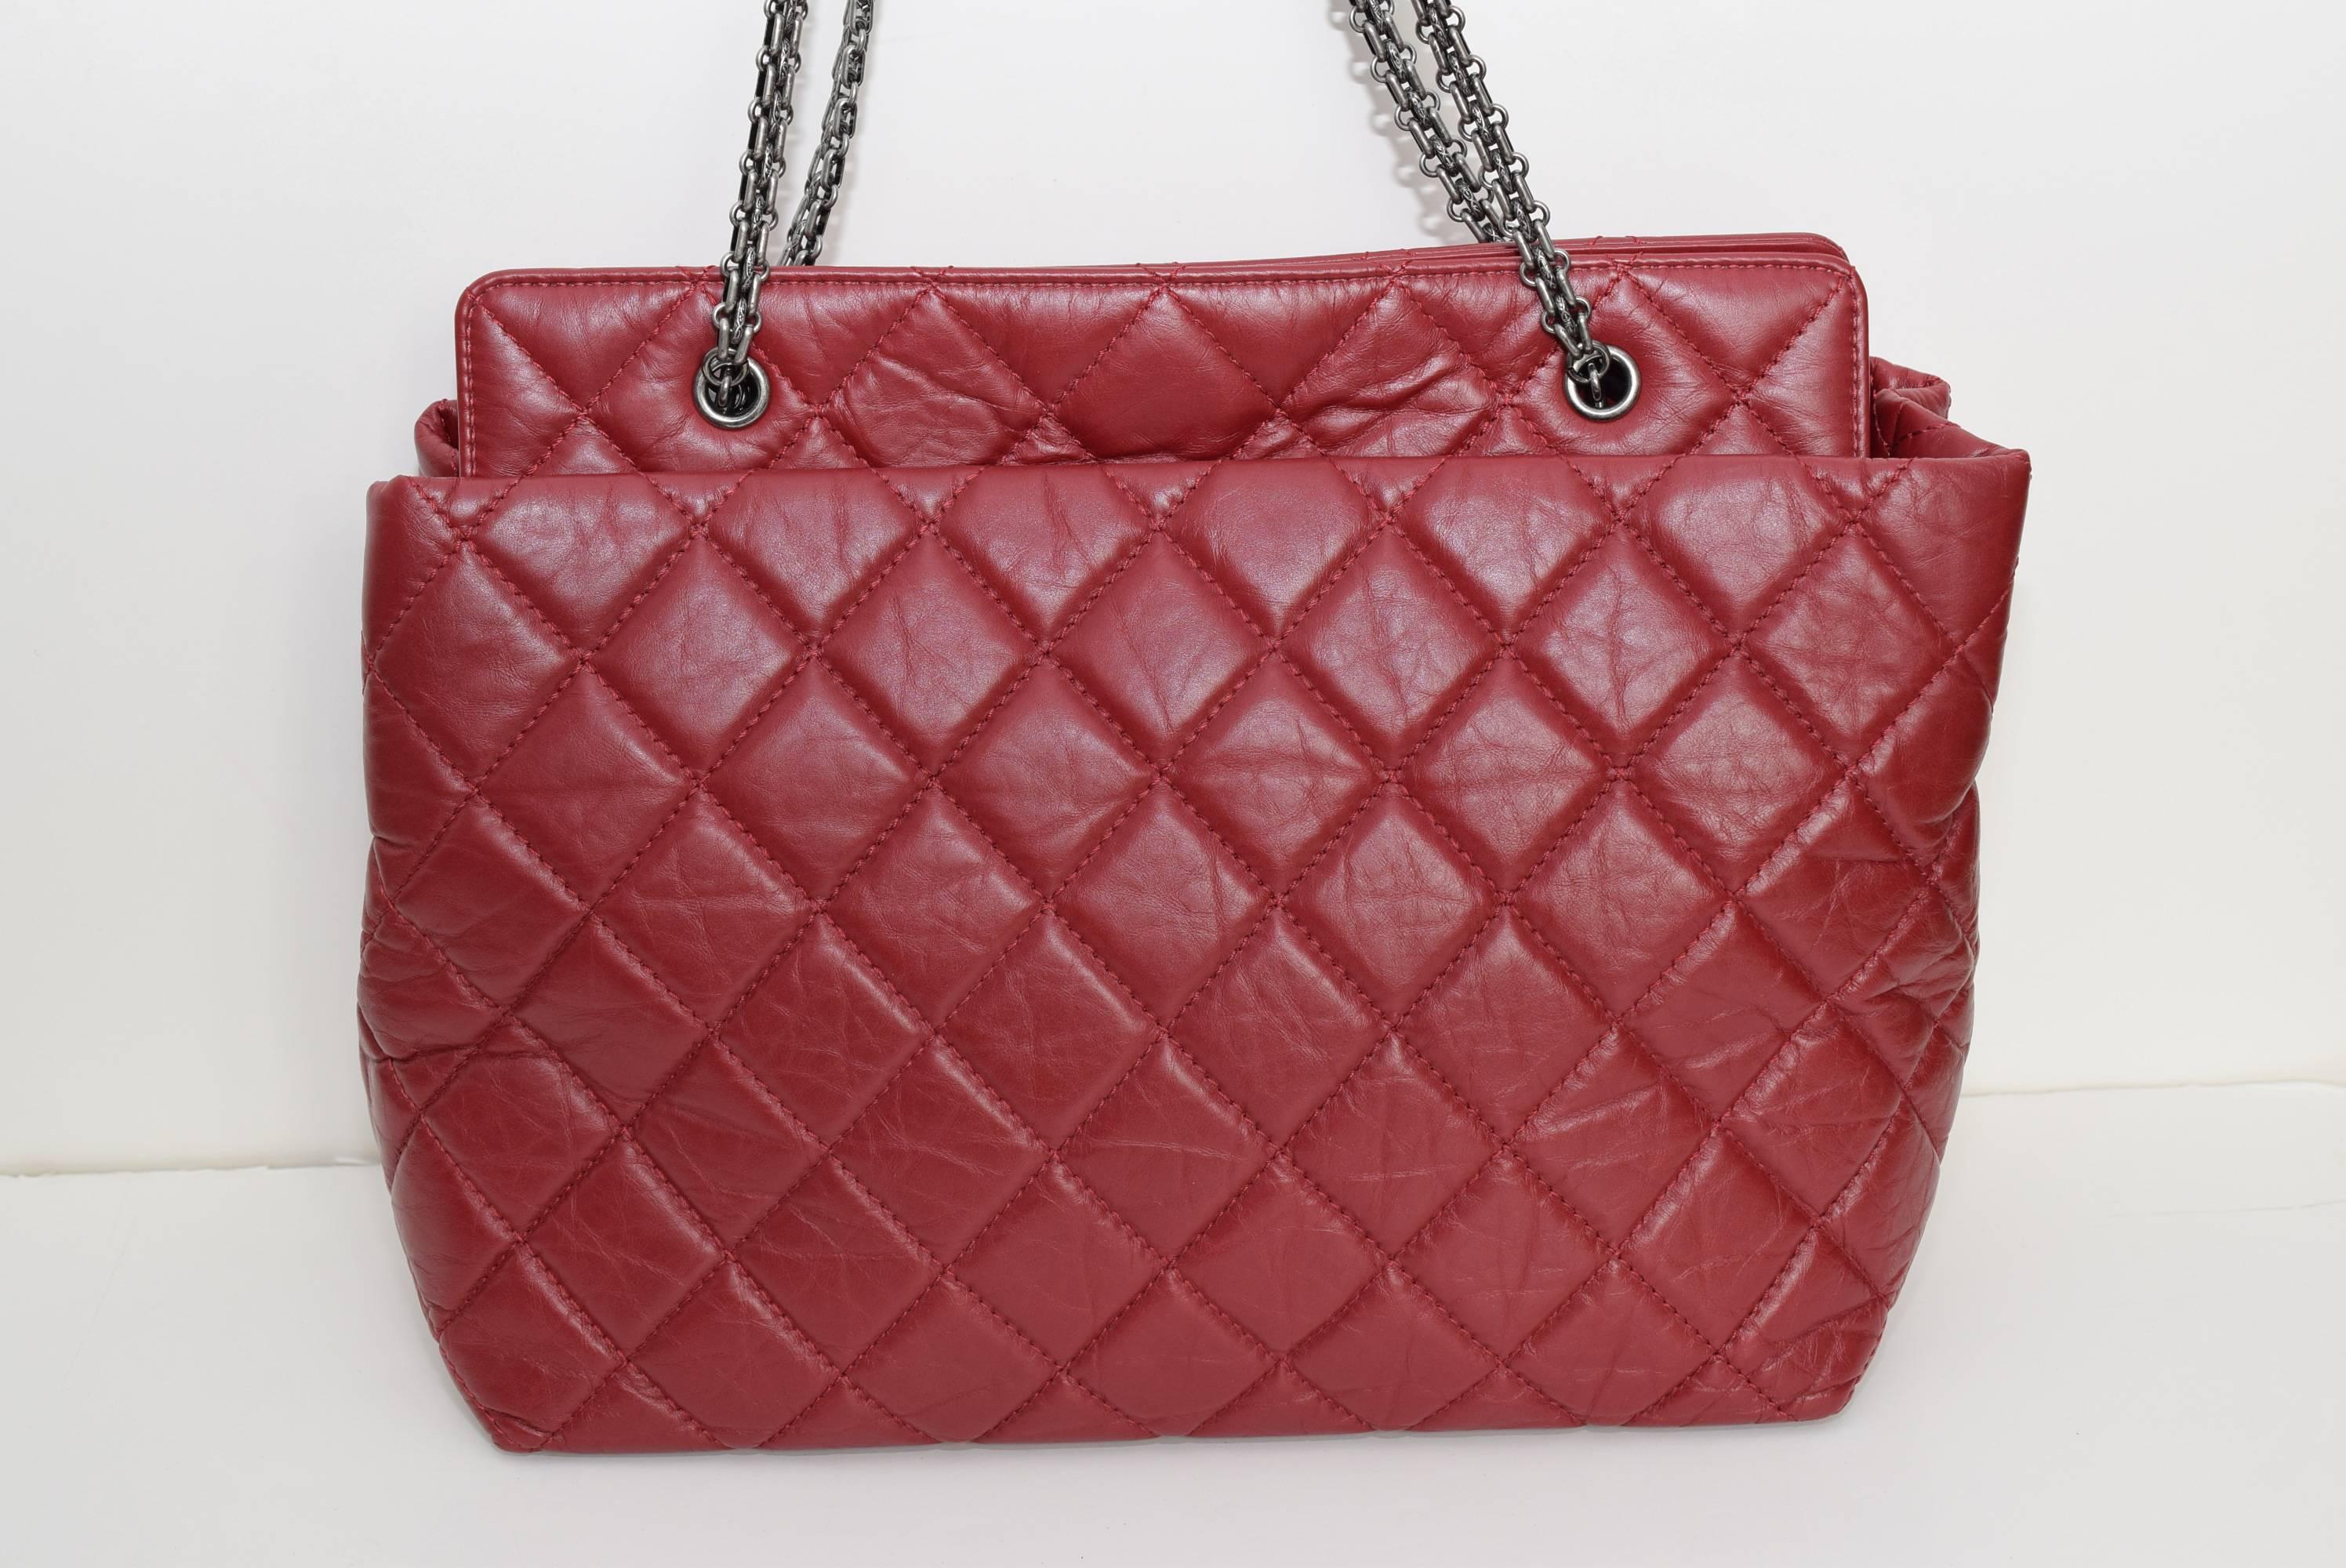 Women's Chanel Grand Shopping Medium Tote Red w/ aged Leather bag.